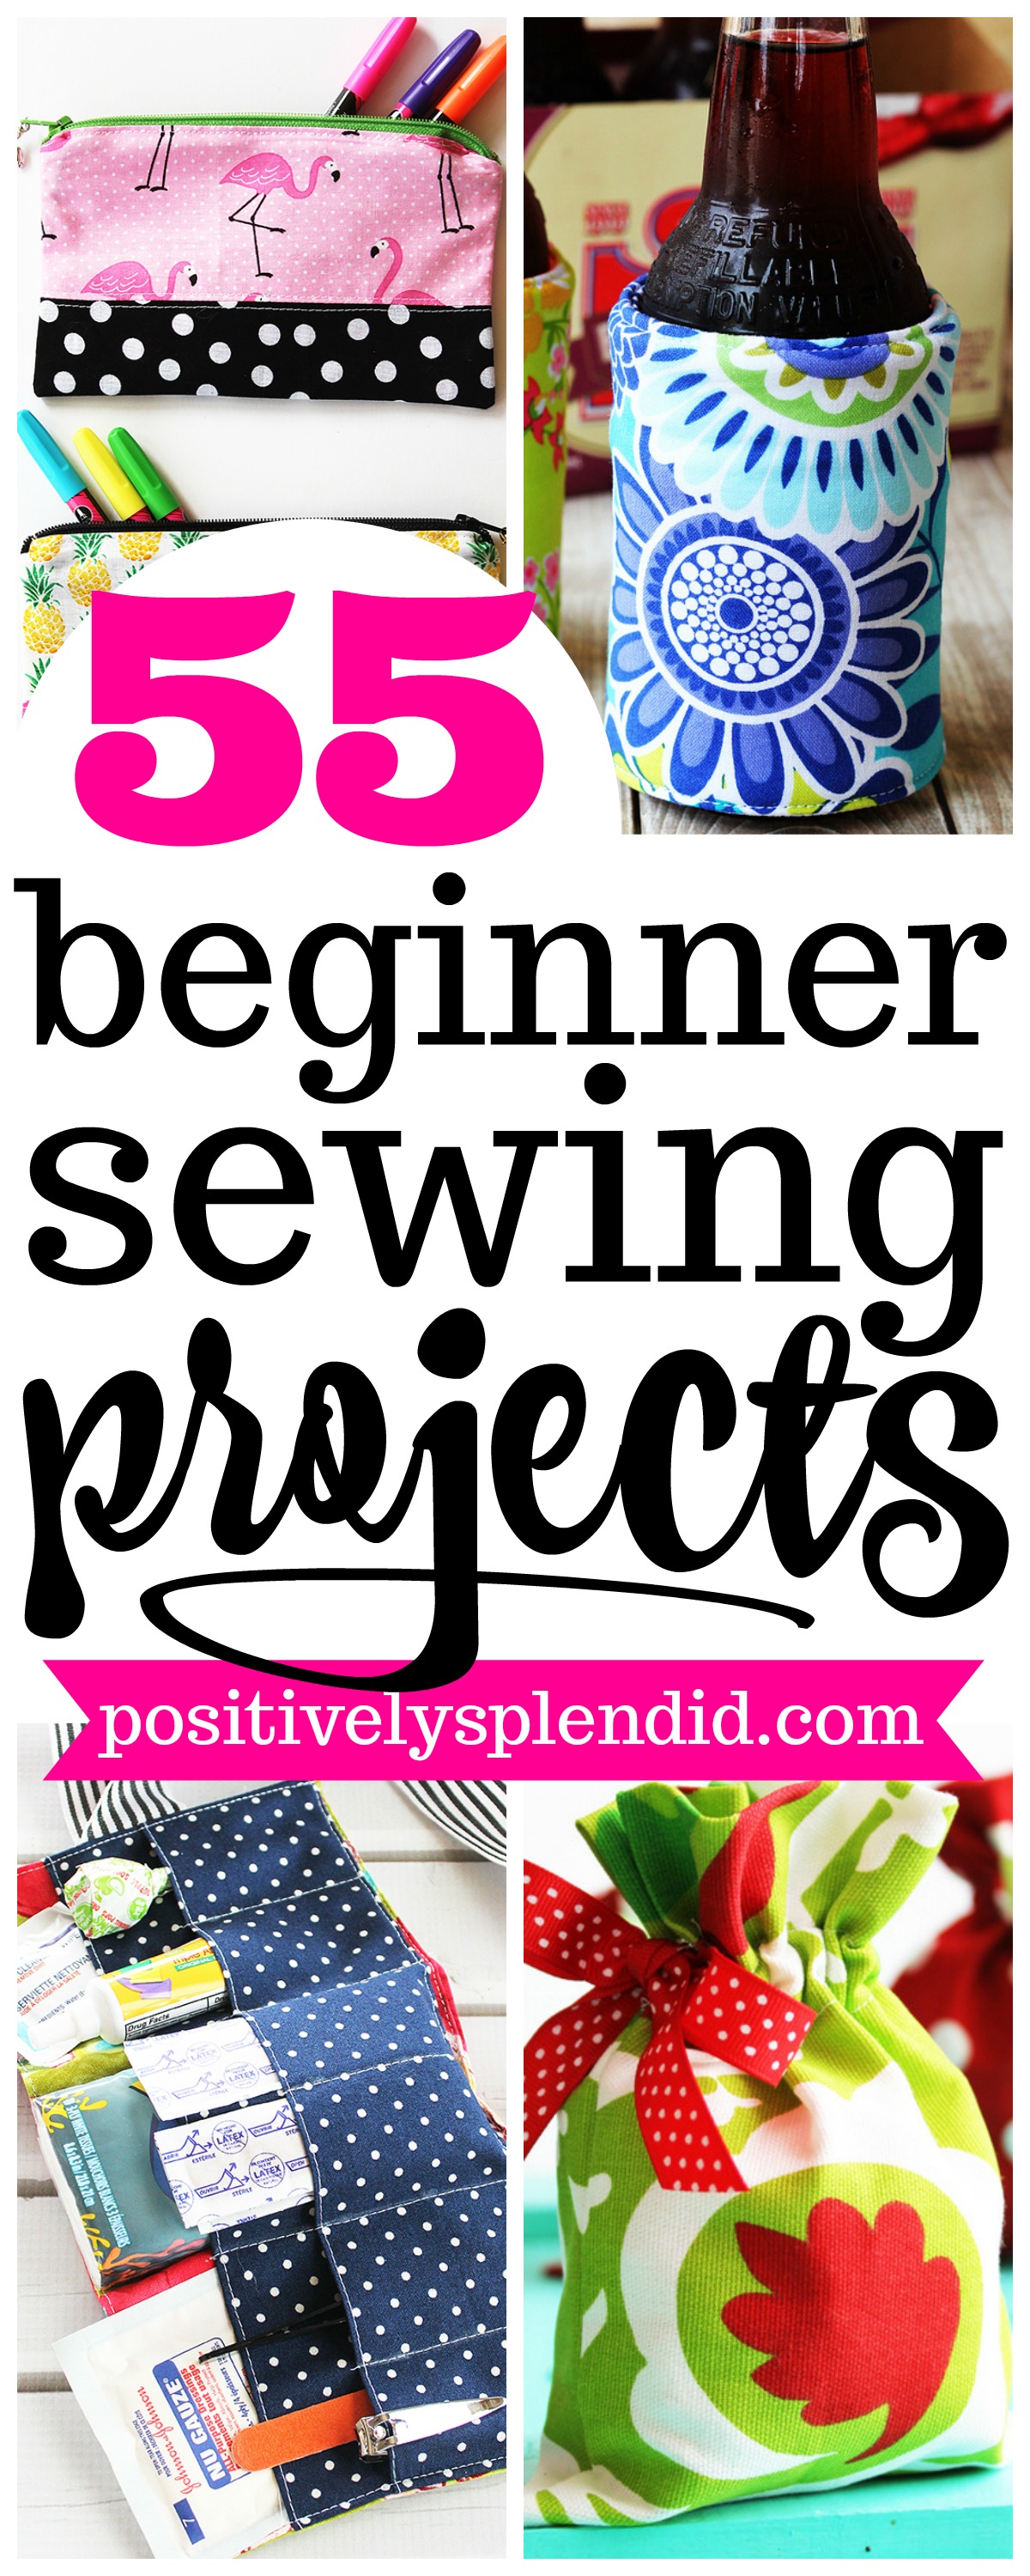 55 Easy Sewing Projects for Beginners - Positively Splendid {Crafts, Sewing,  Recipes and Home Decor}